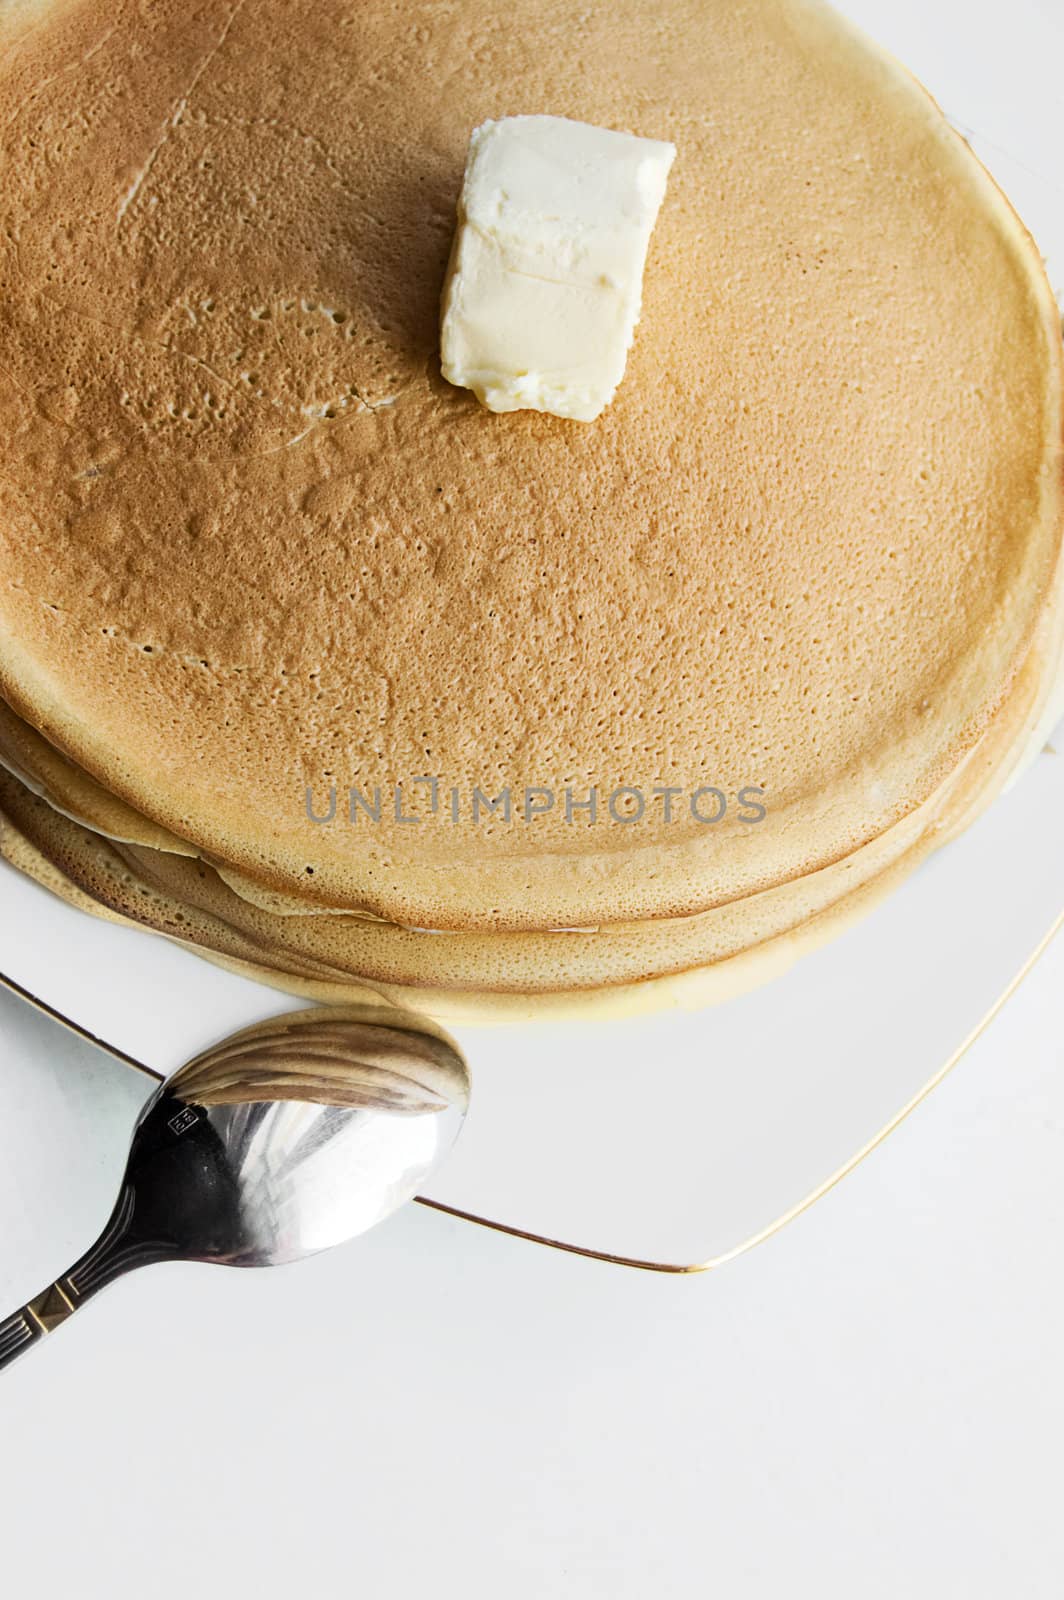 Pile of pancakes with butter and spon on plate